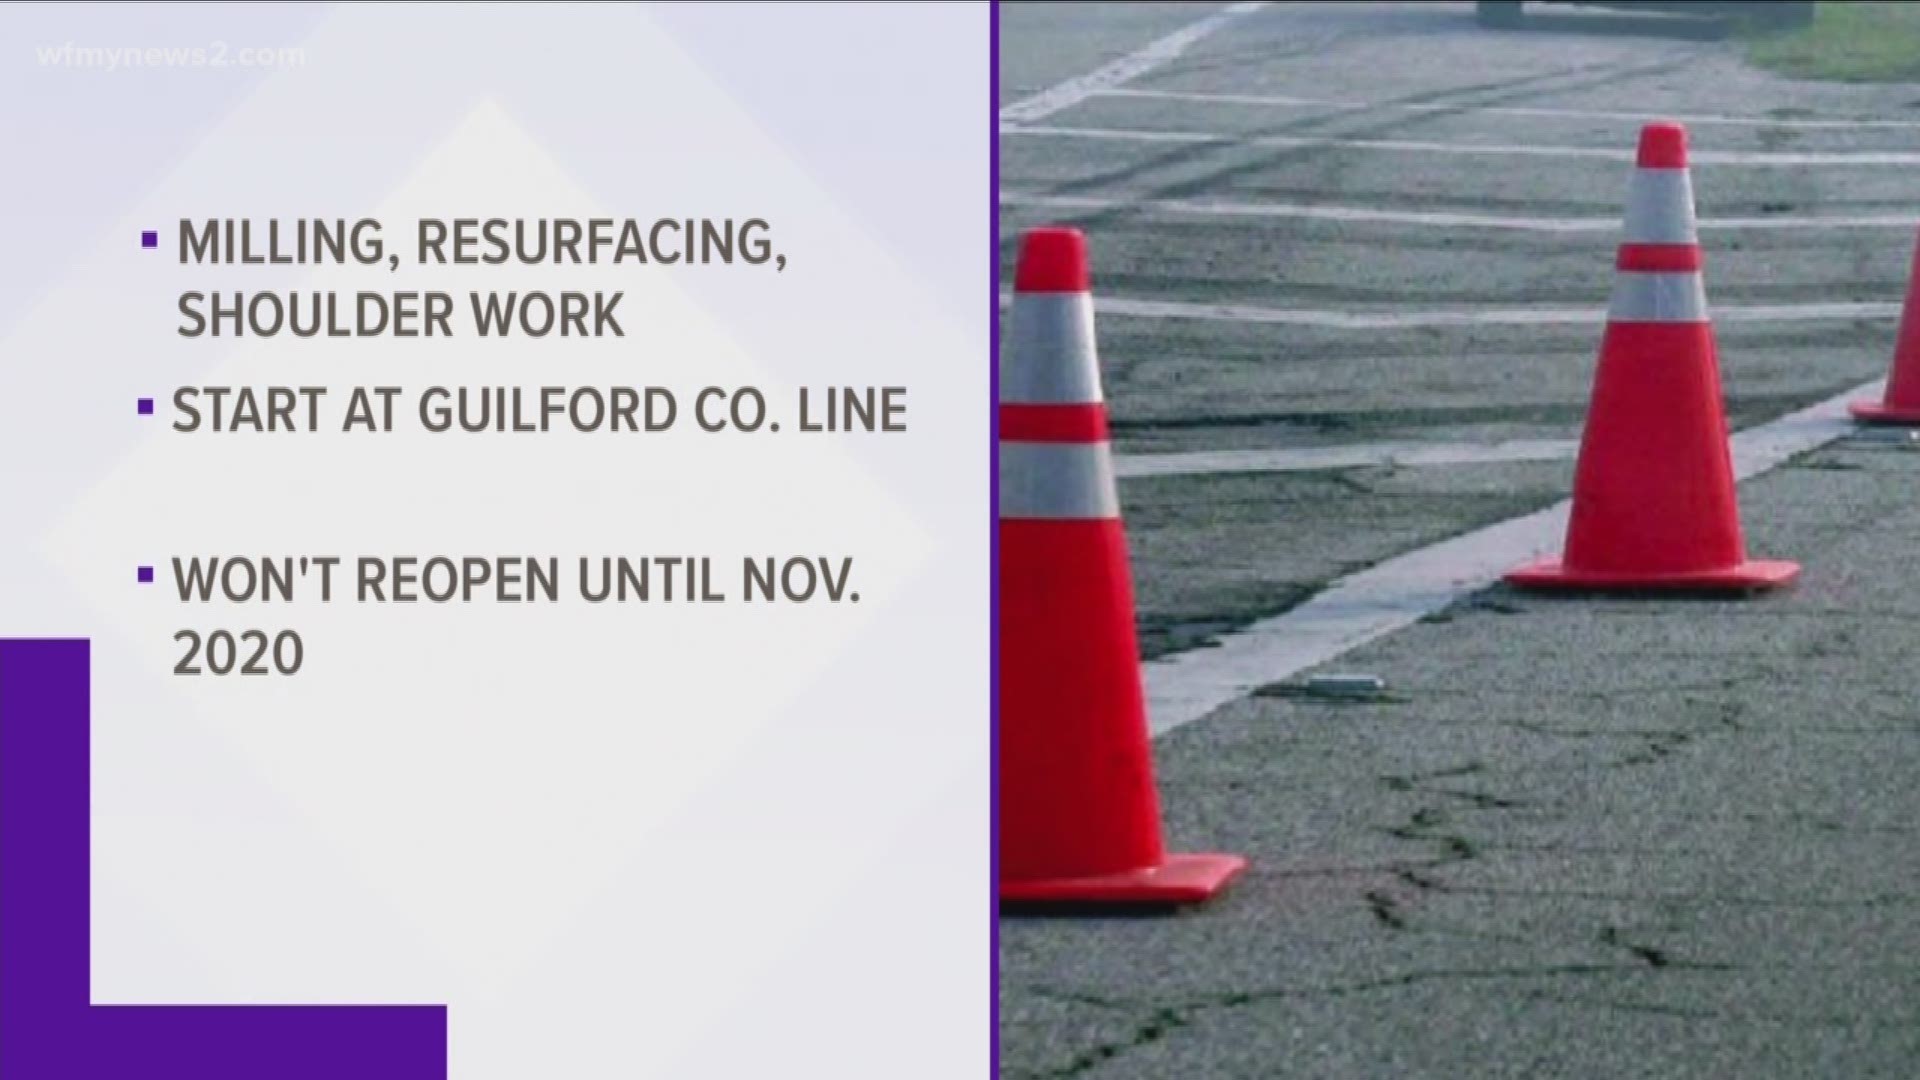 Starting in July, the state is closing 69 miles of roads for milling, resurfacing and shoulder reconstruction.